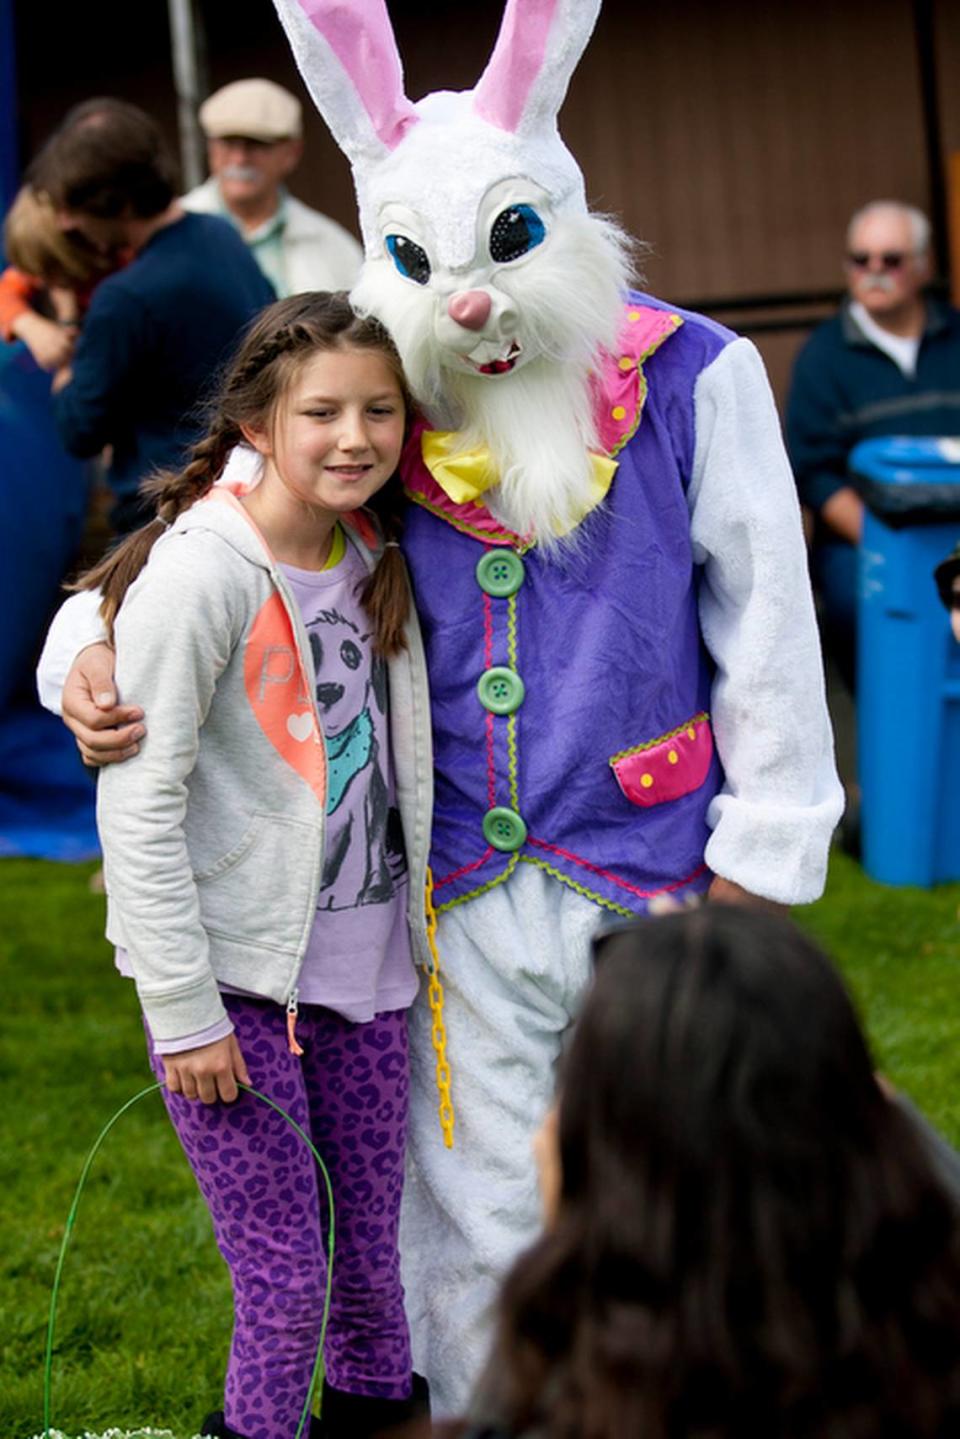 Hundreds of kids and parents joined in on the fun activities and an Easter egg hunt at the Los Osos Community Center in 2013. Julie Bundy, of Dana Point, takes a photo of her daughter, Haley, 9 with the Easter Bunny. ldickinson@thetribunenews.com